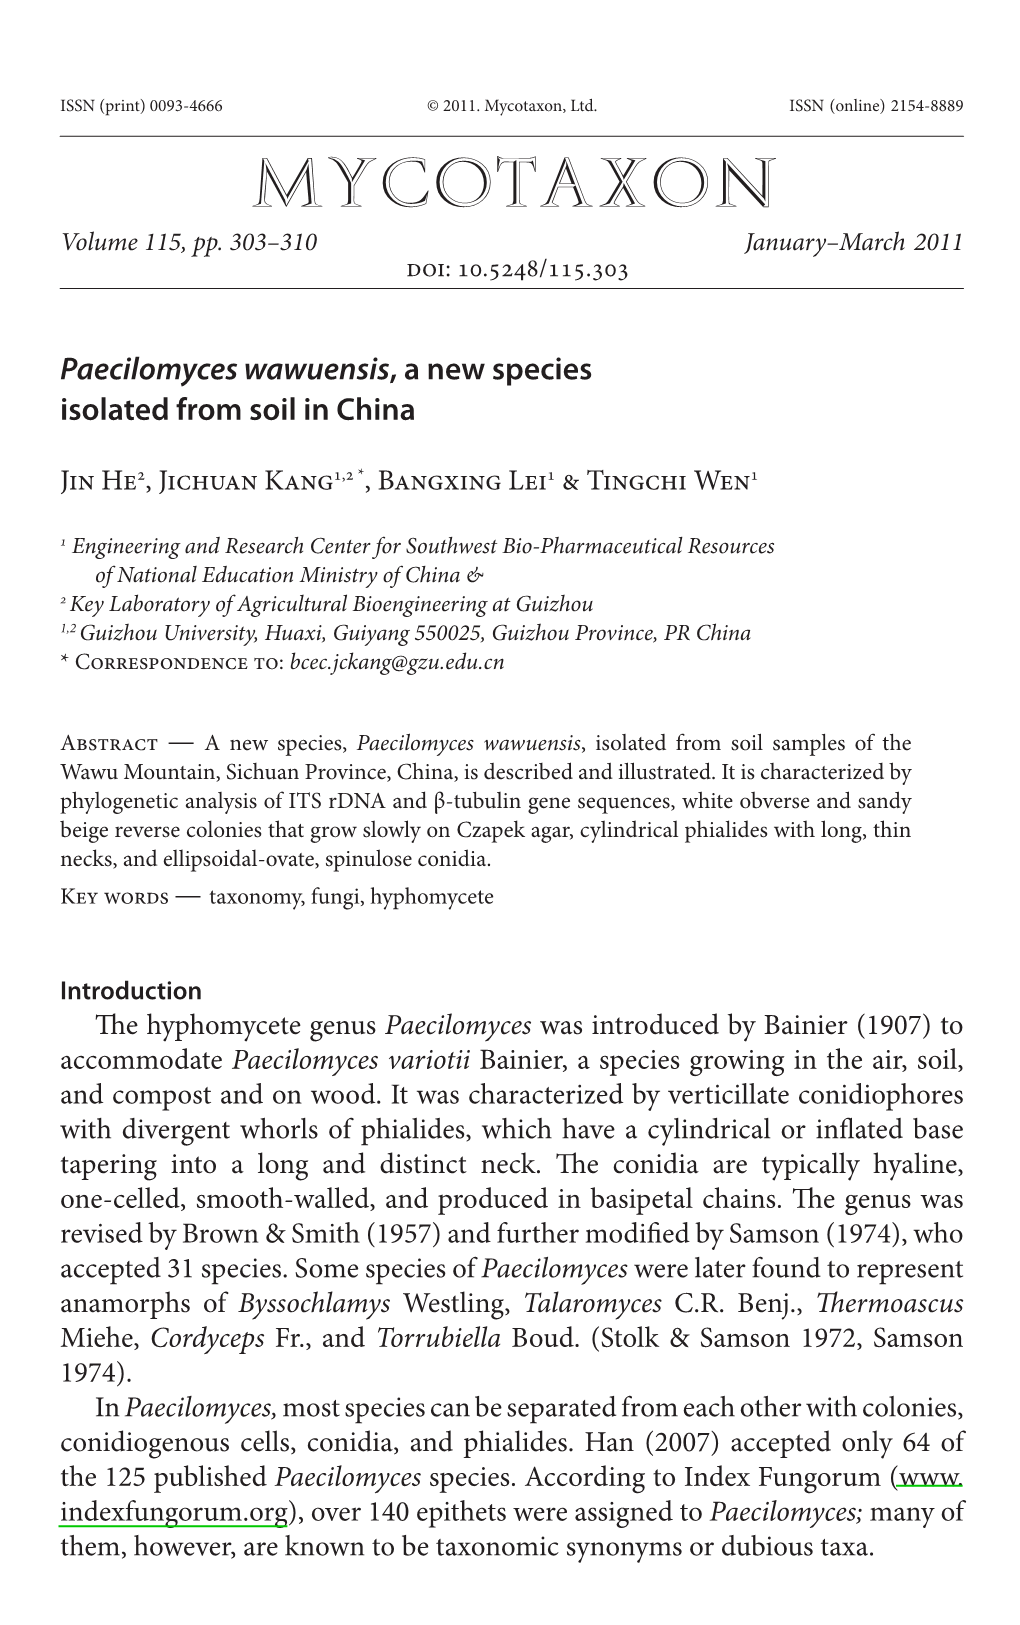 &lt;I&gt;Paecilomyces Wawuensis&lt;/I&gt;, a New Species Isolated from Soil in China